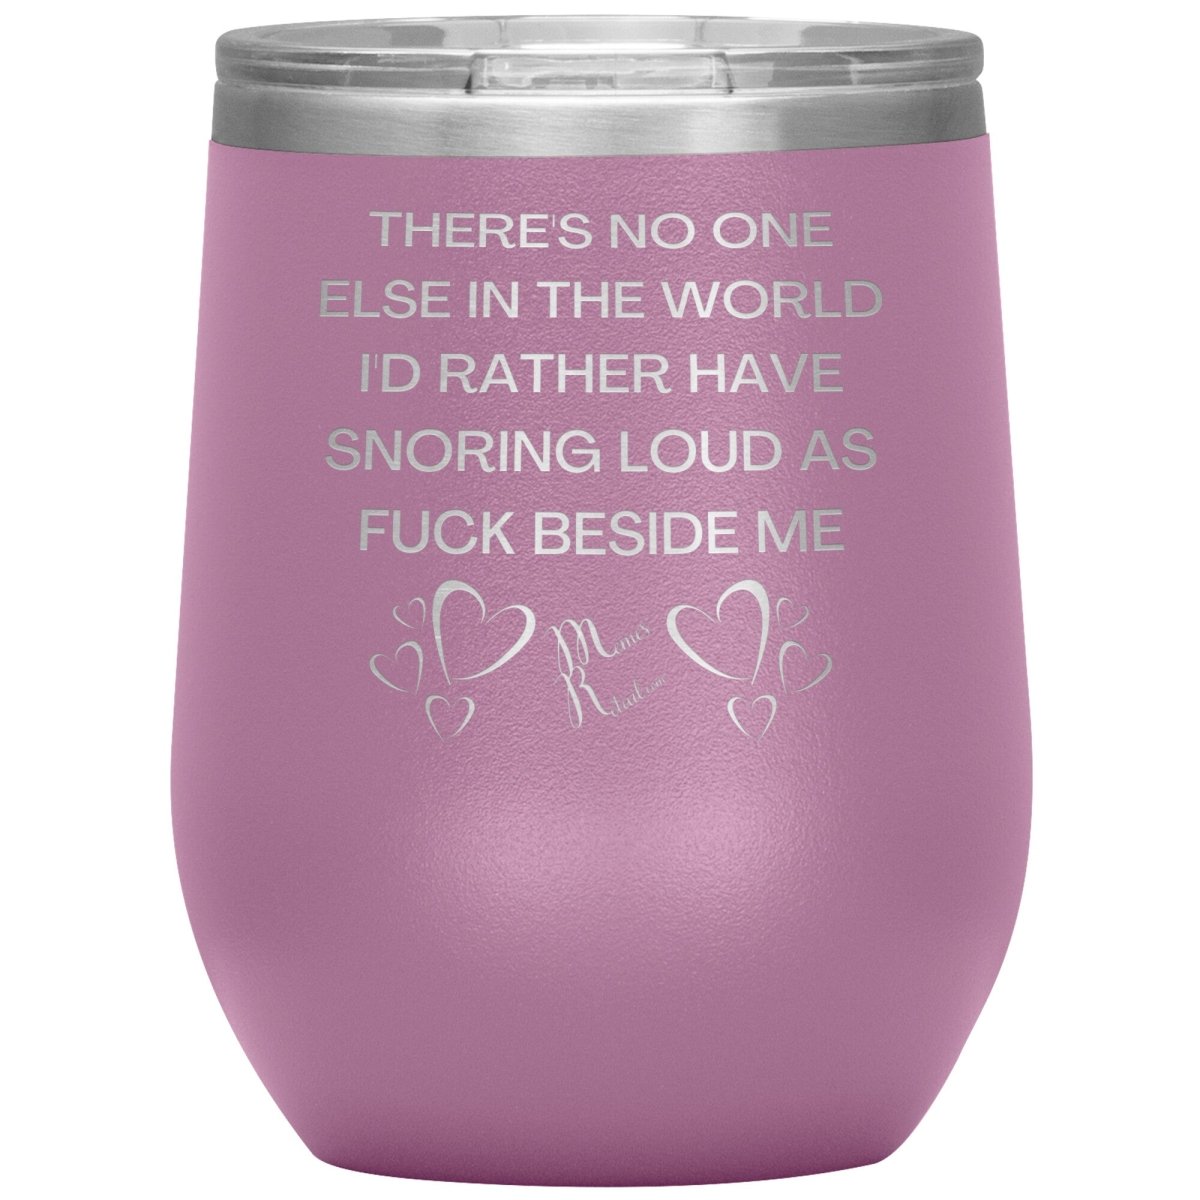 There's No One Else in the World I'd Rather Have Snoring Loud, 12oz Wine Insulated Tumbler / Light Purple - MemesRetail.com